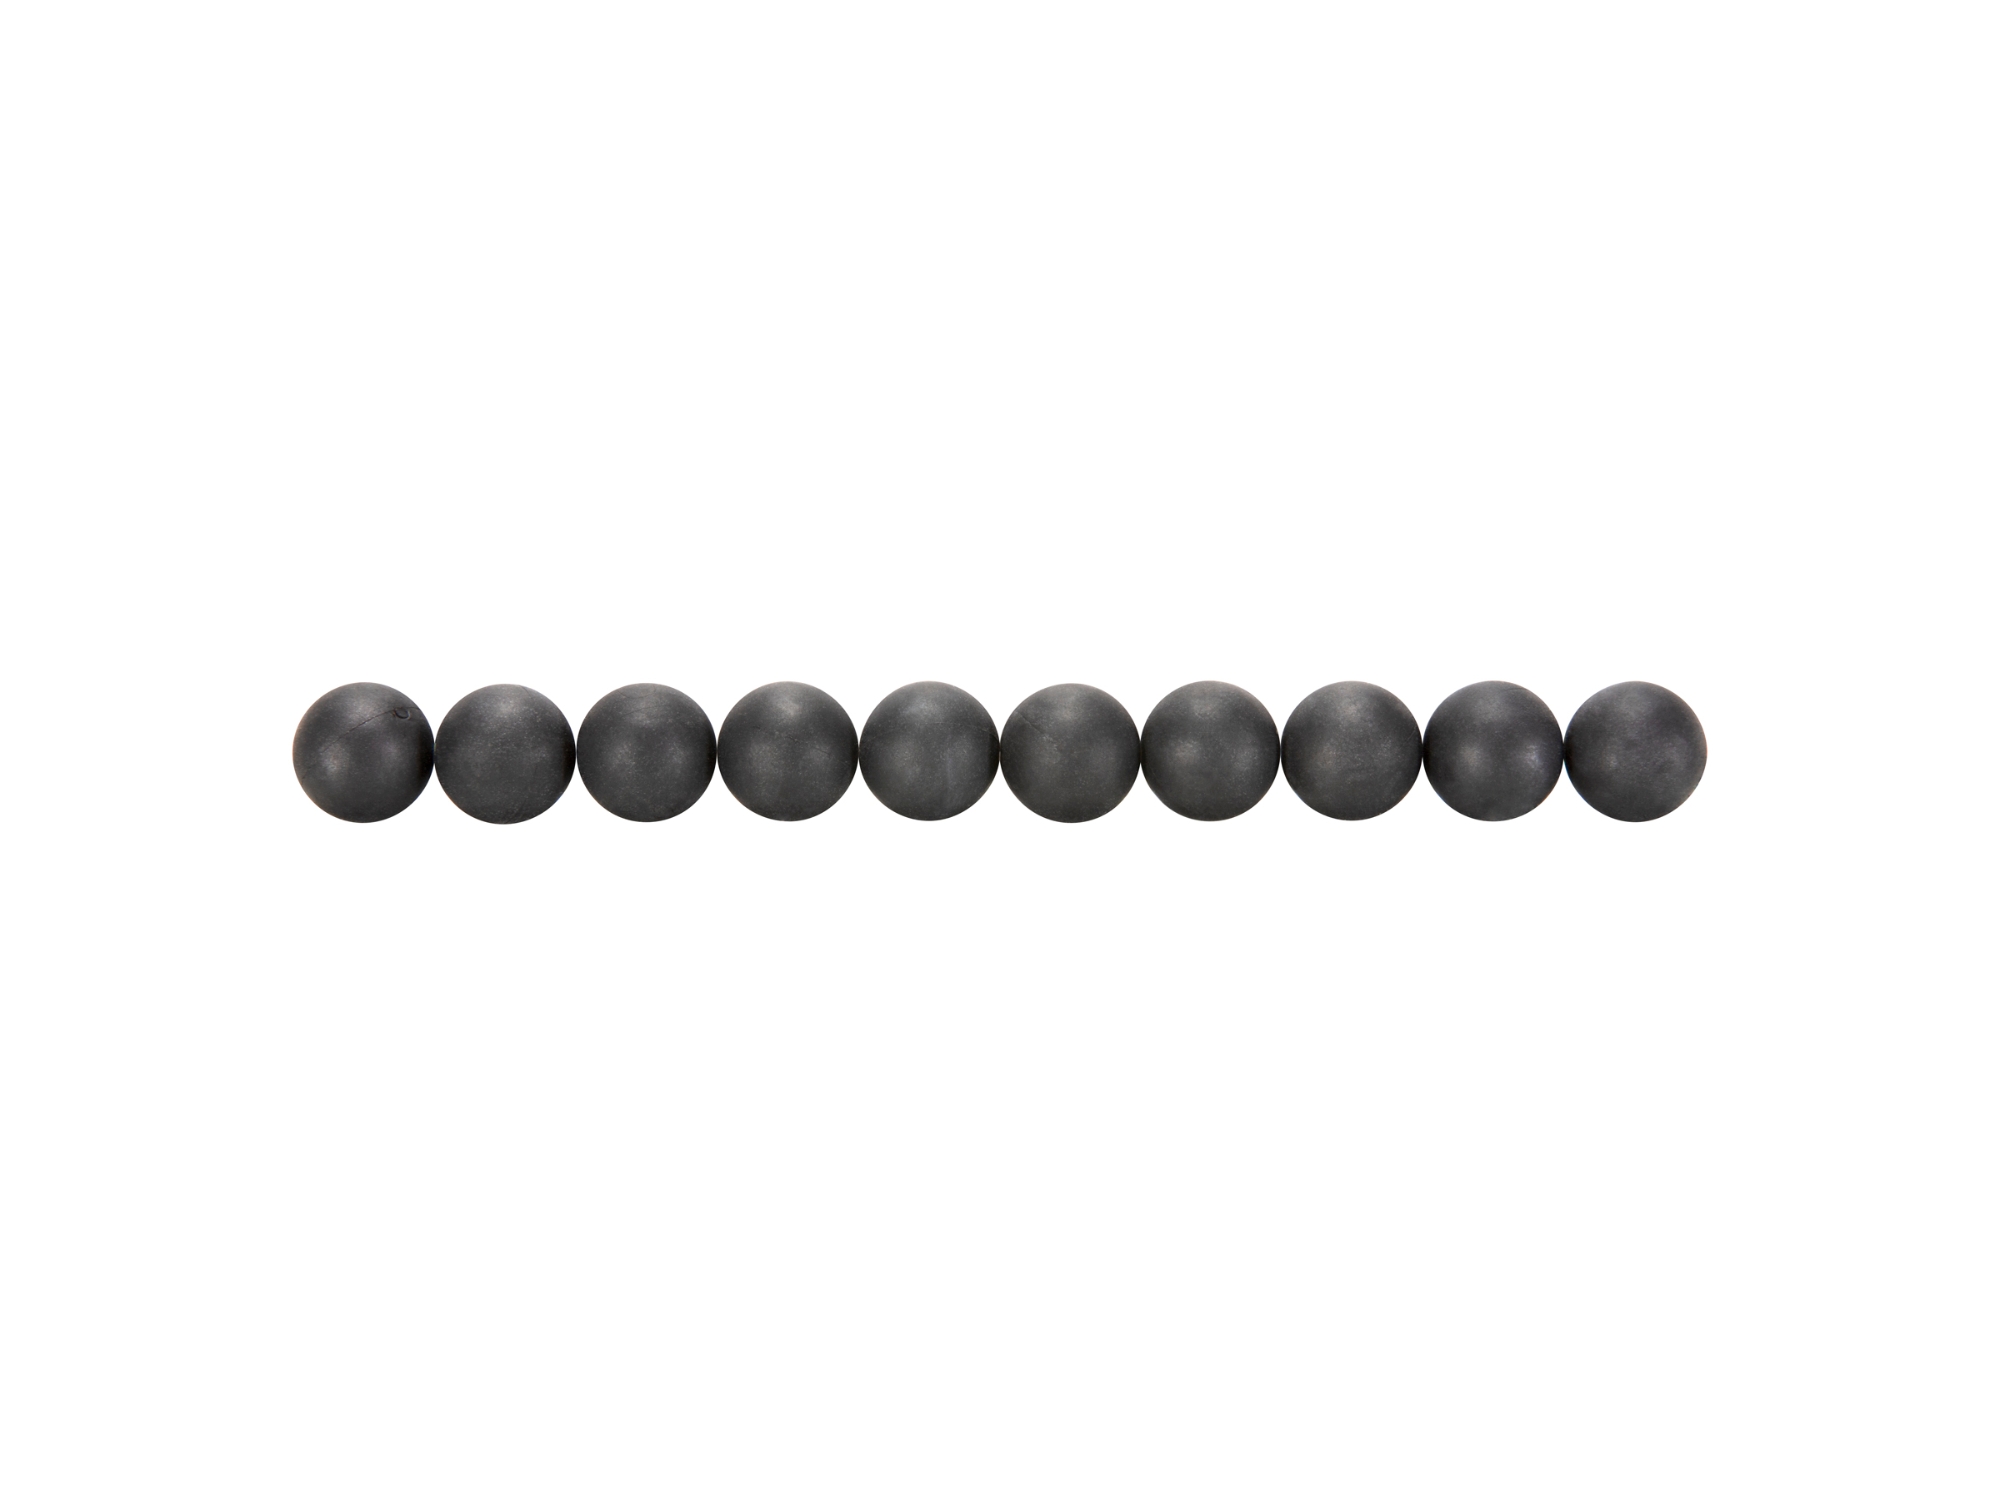 P2P .50 caliber Rubber Ball Rounds 10ct Tube